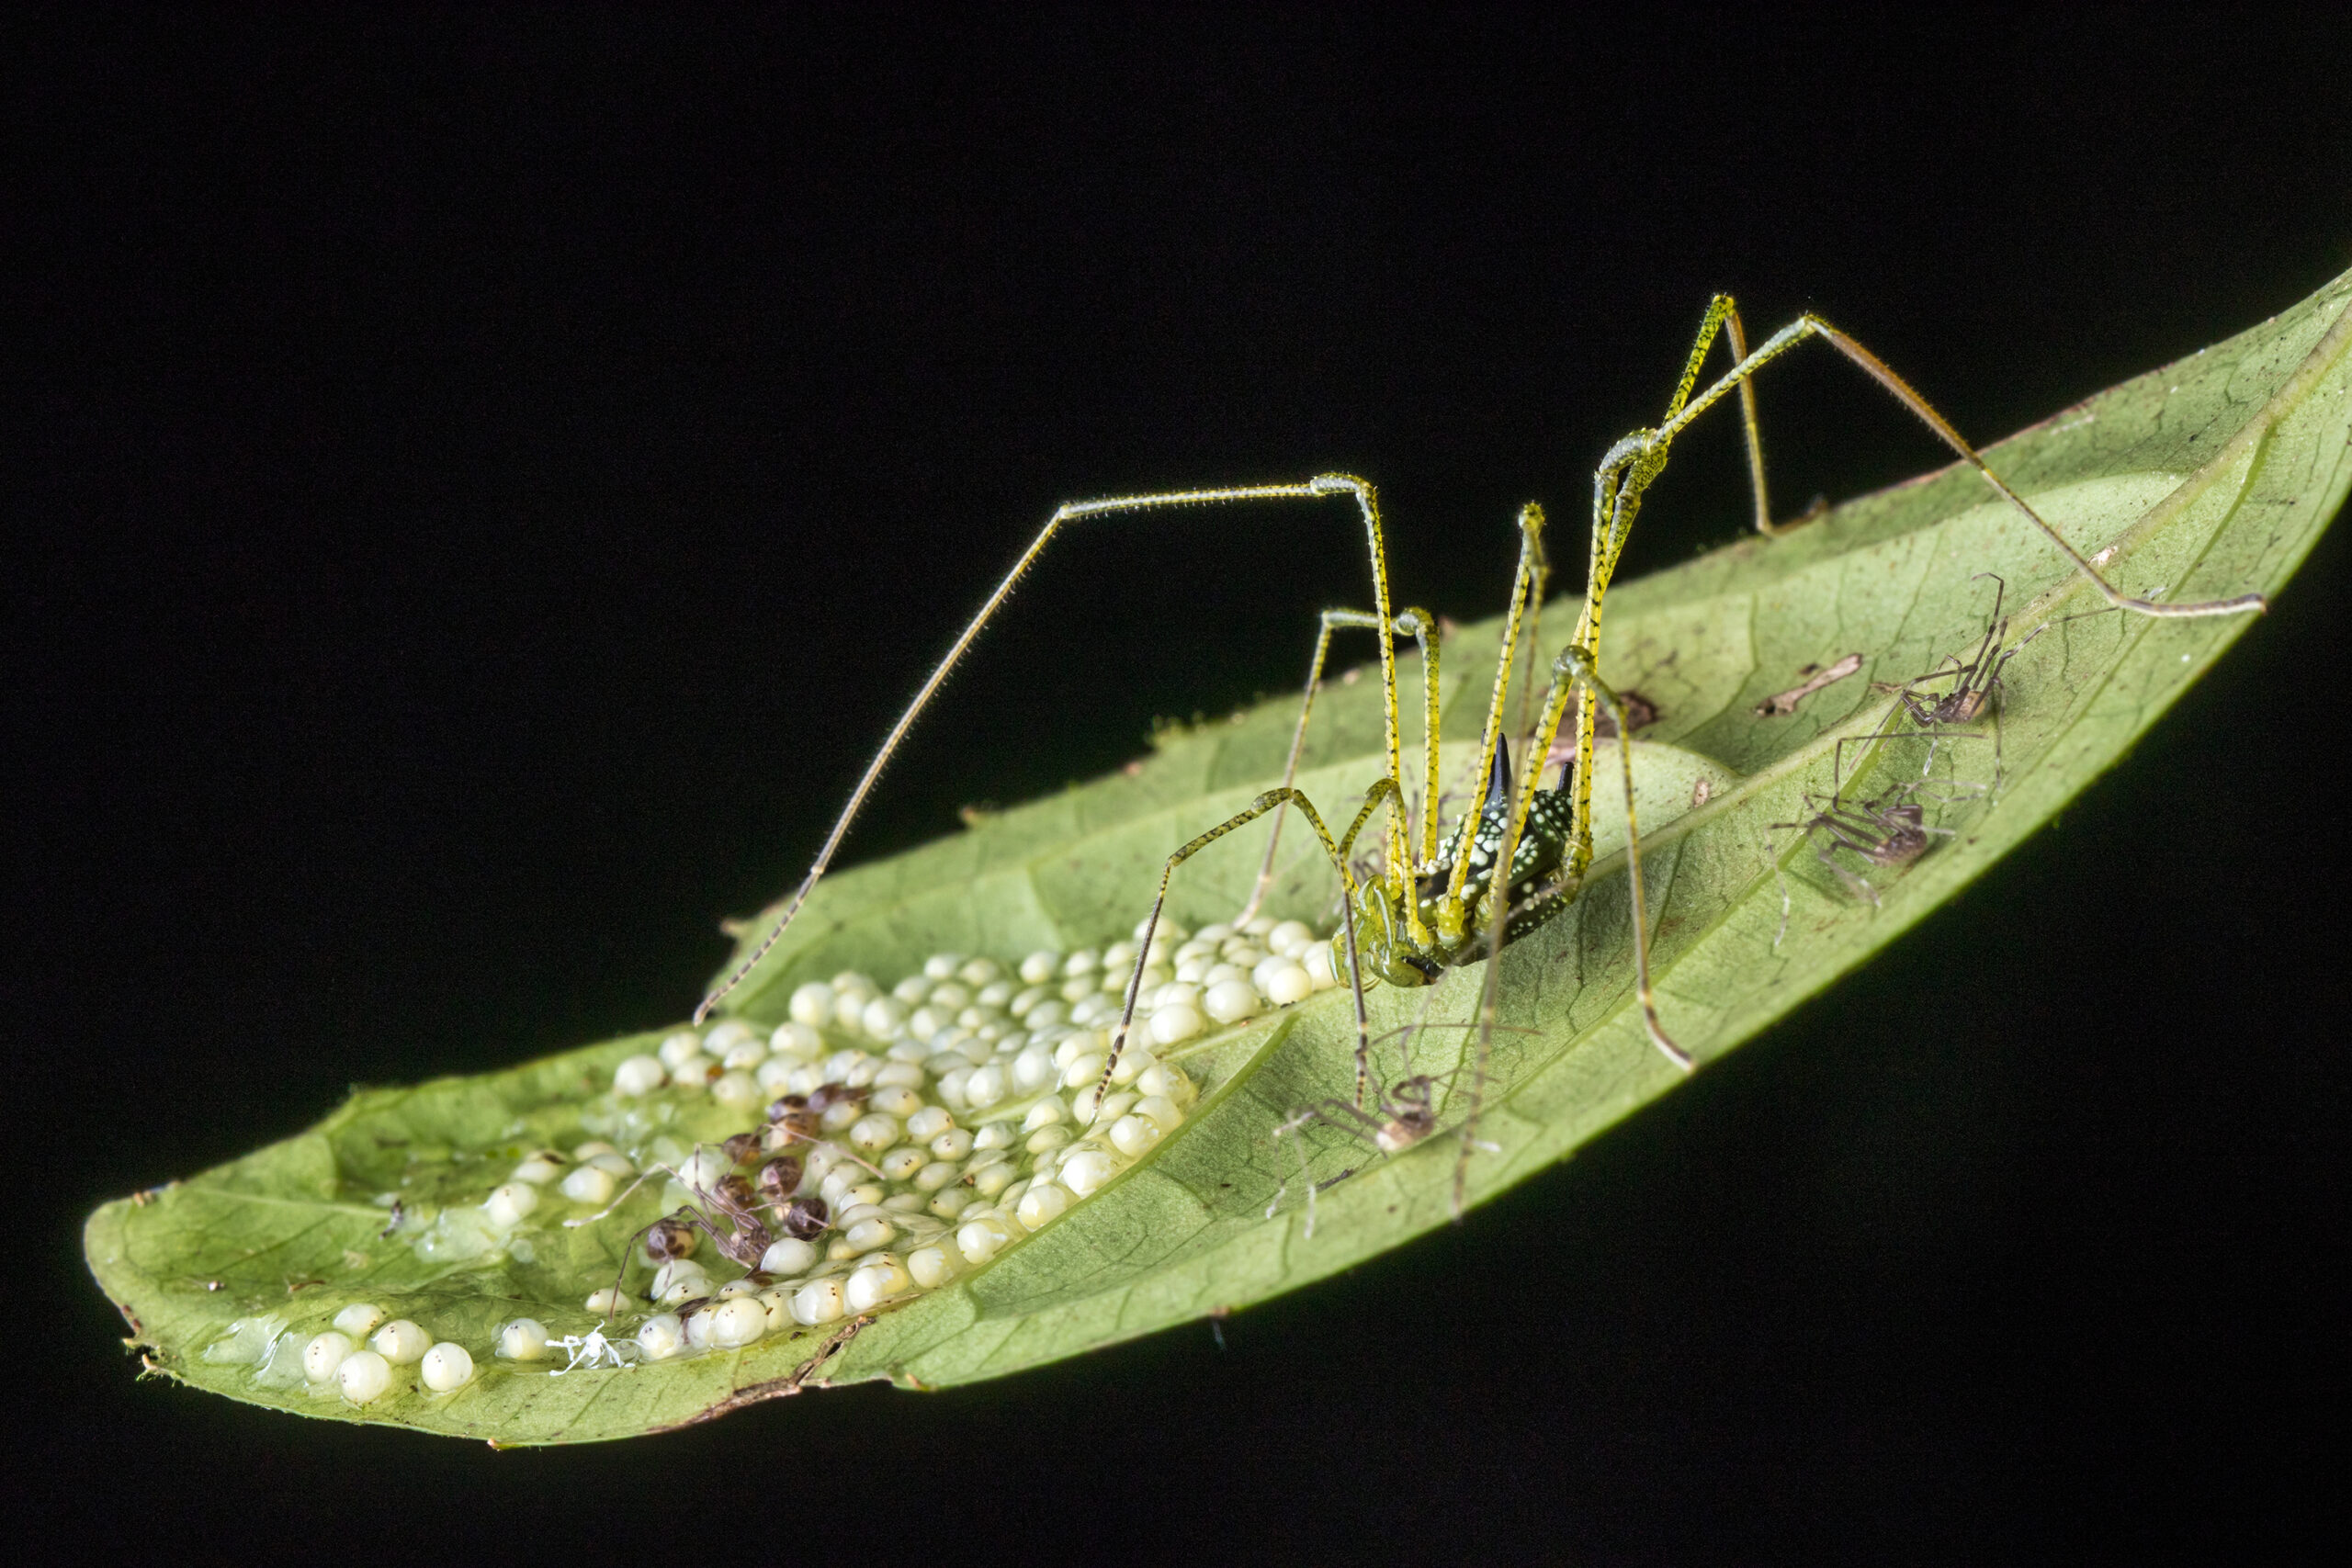 Surprise! Wisconsin scientists discover more eyes on daddy longlegs